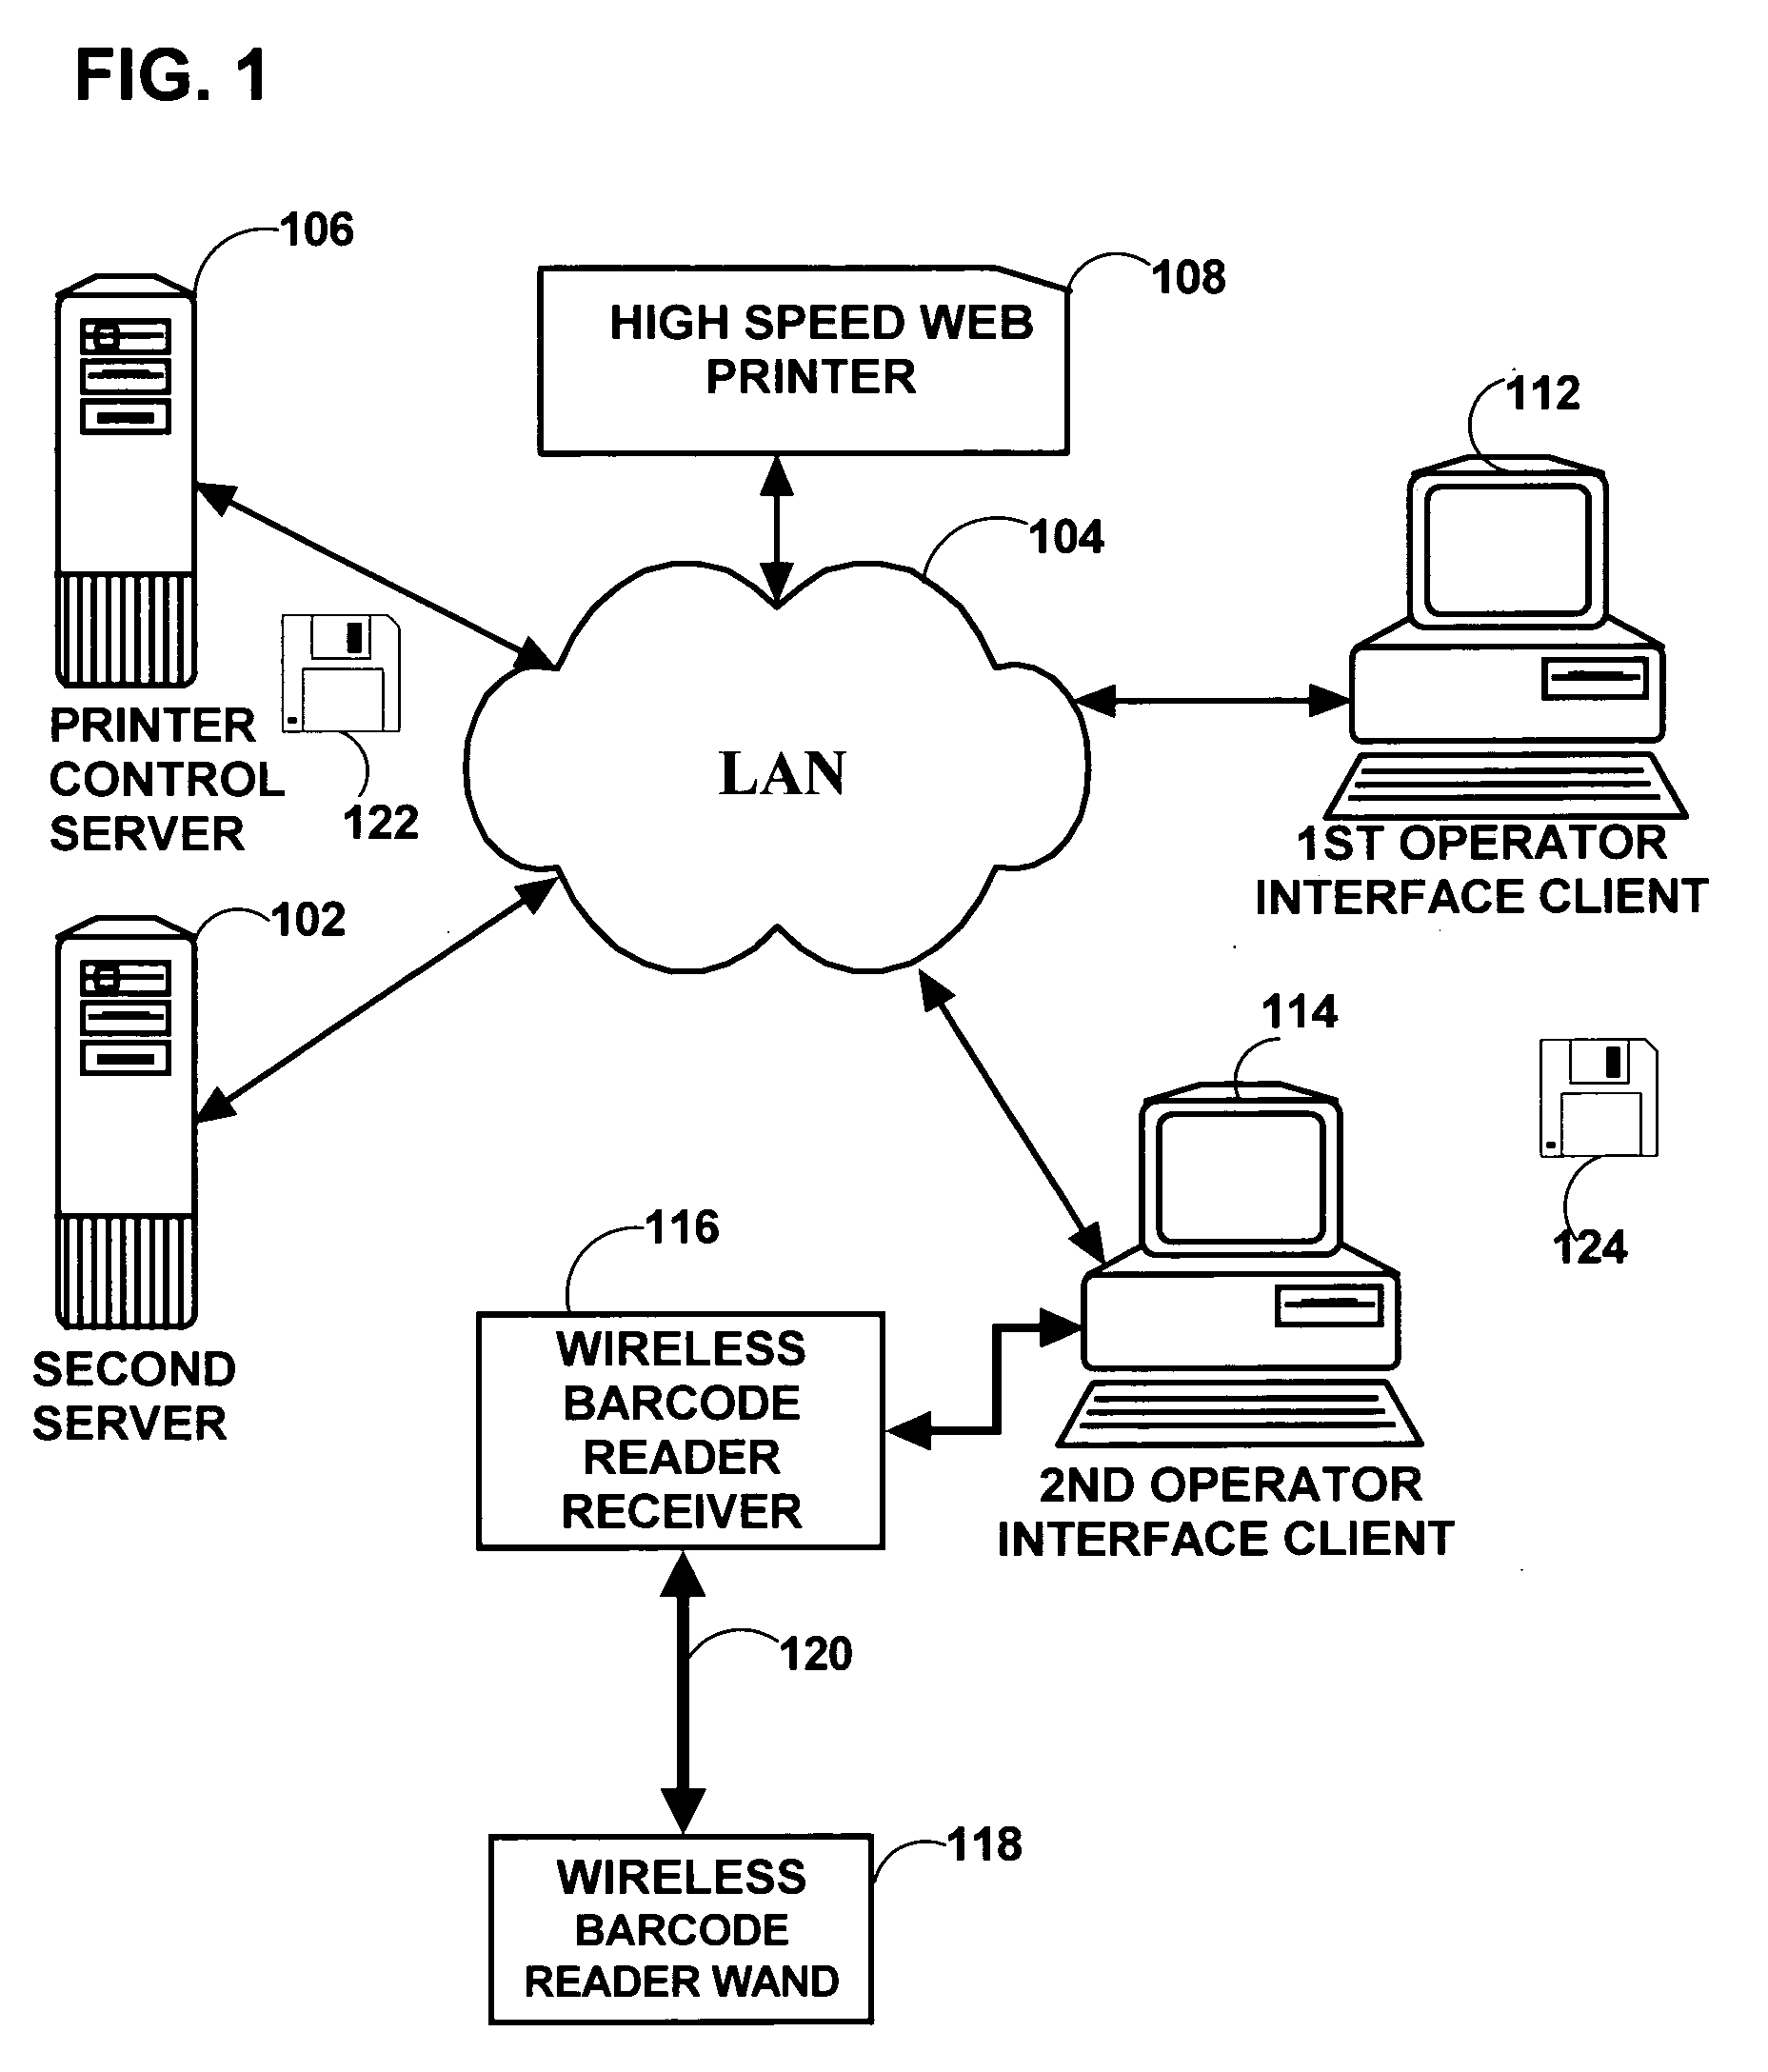 Method and apparatus for arranging a plurality of orders for printed articles